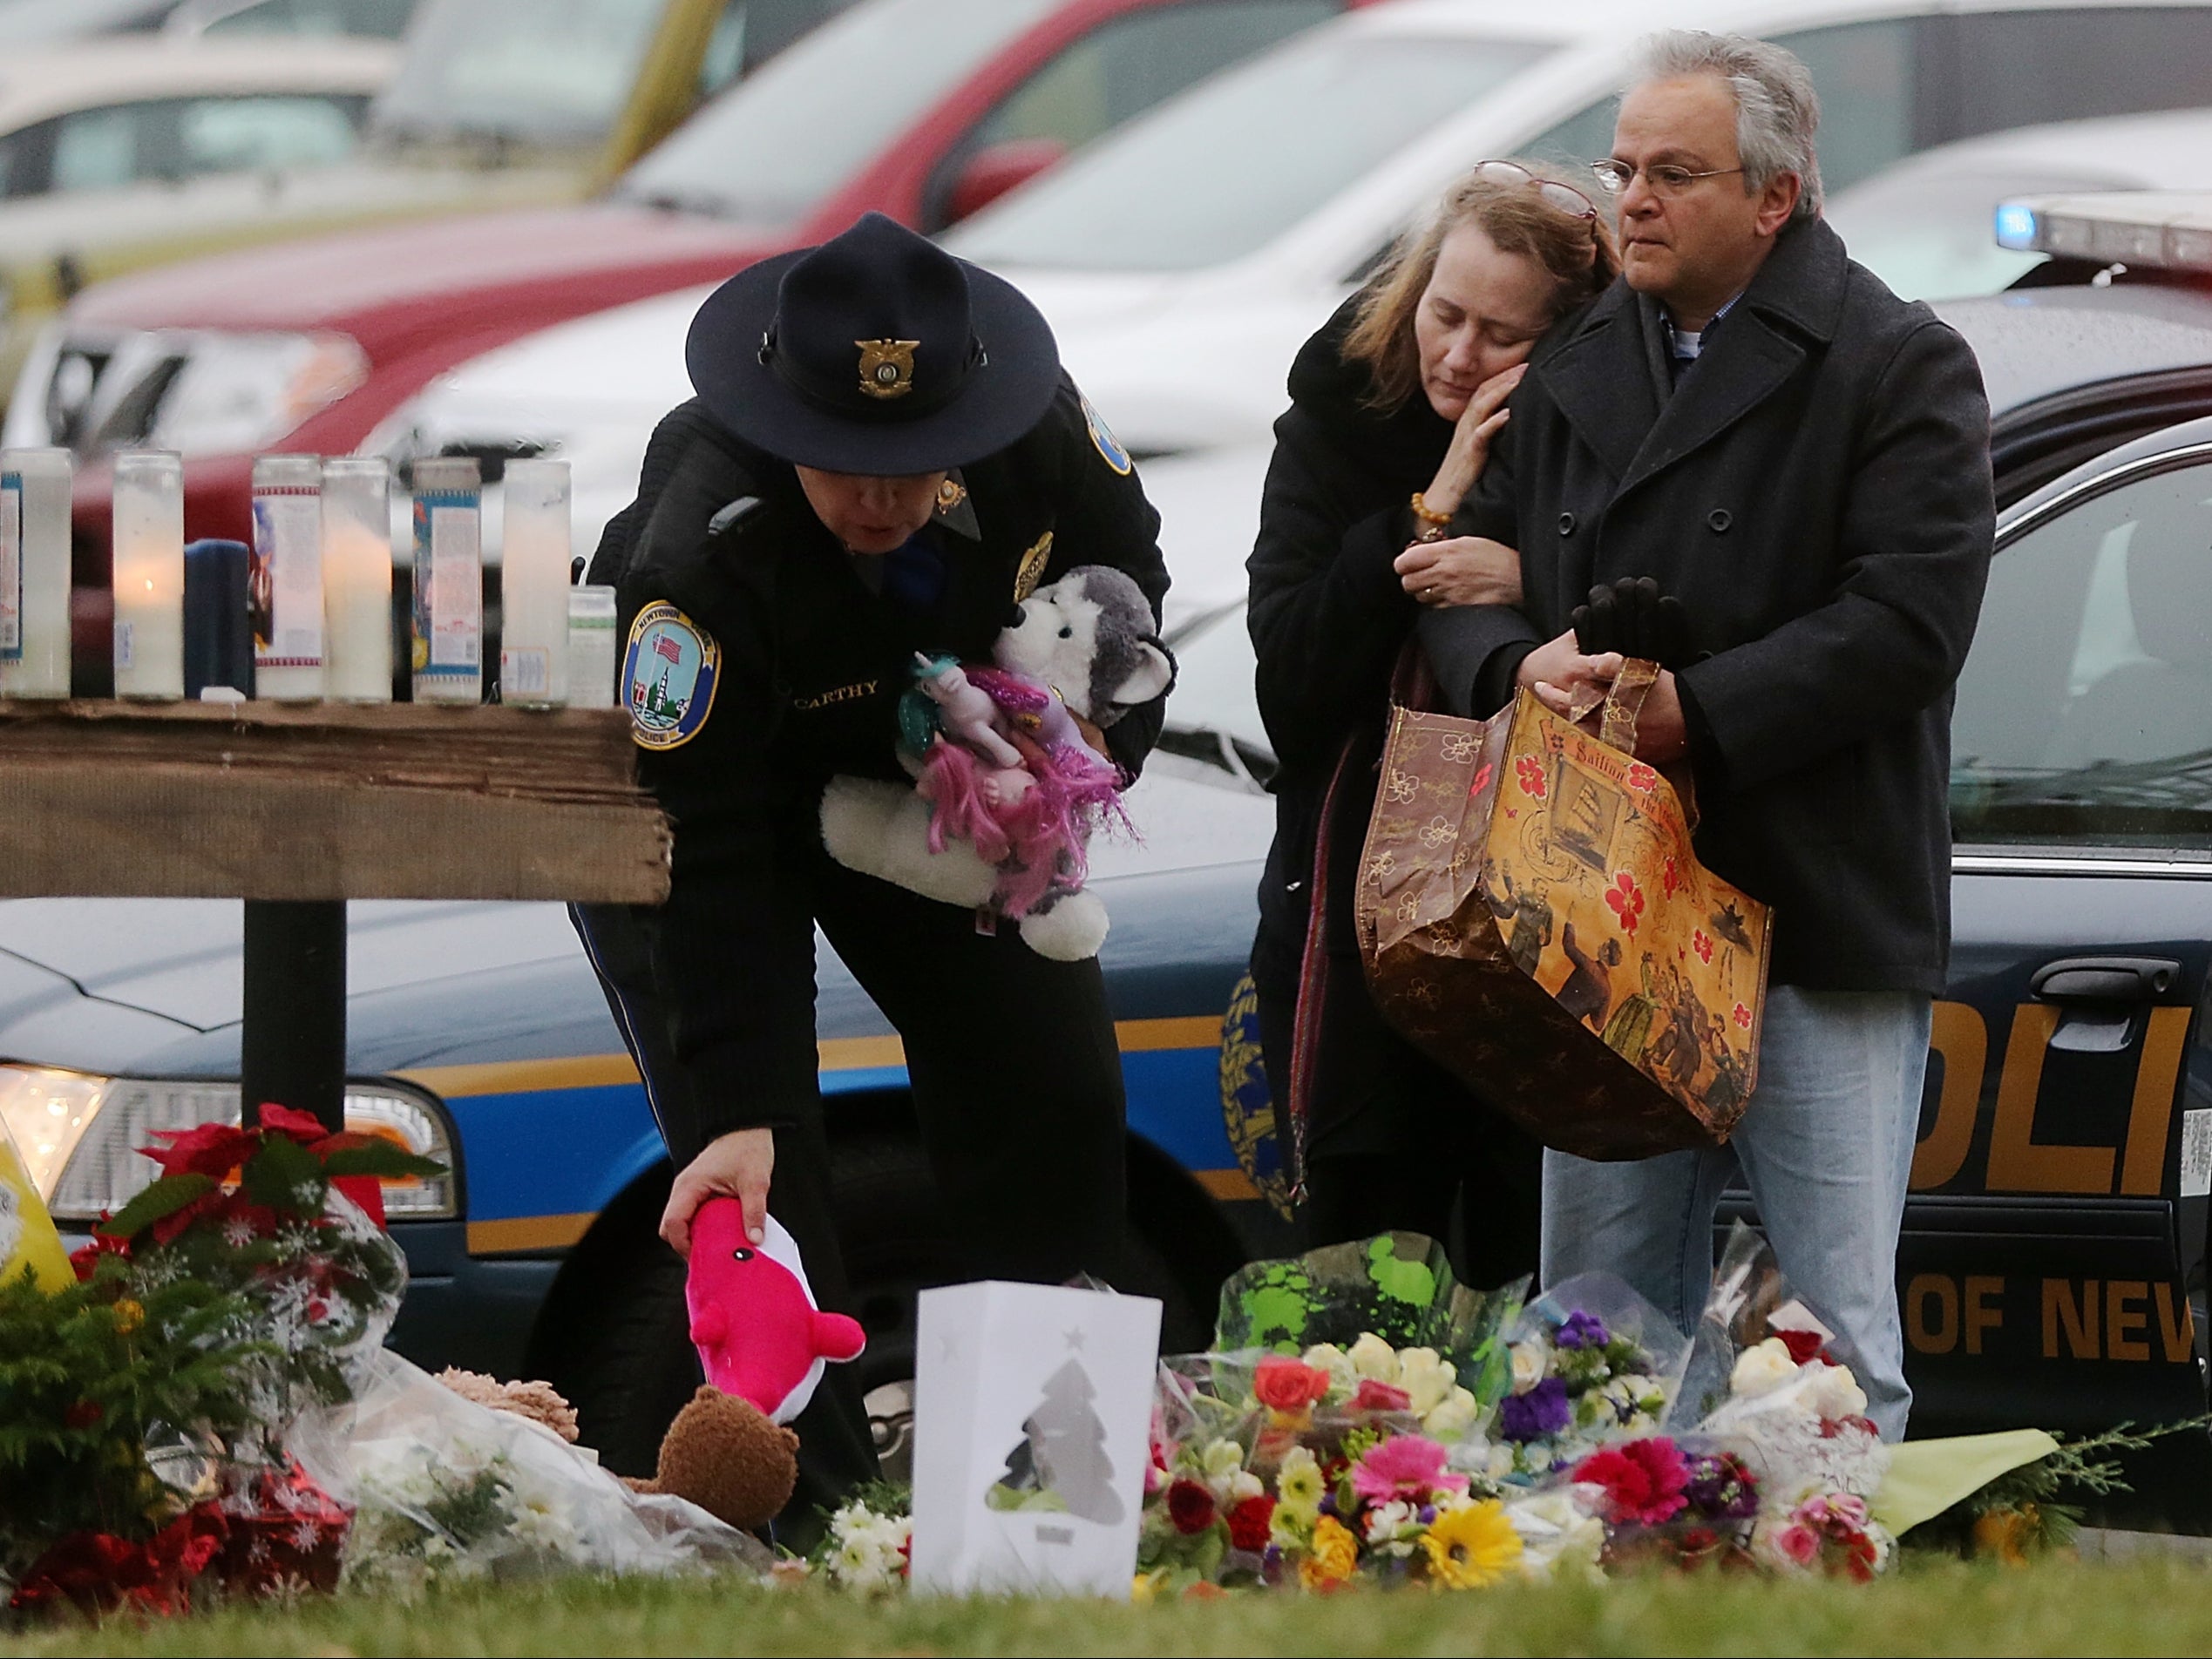 Mourners gather following the Sandy Hook school shooting